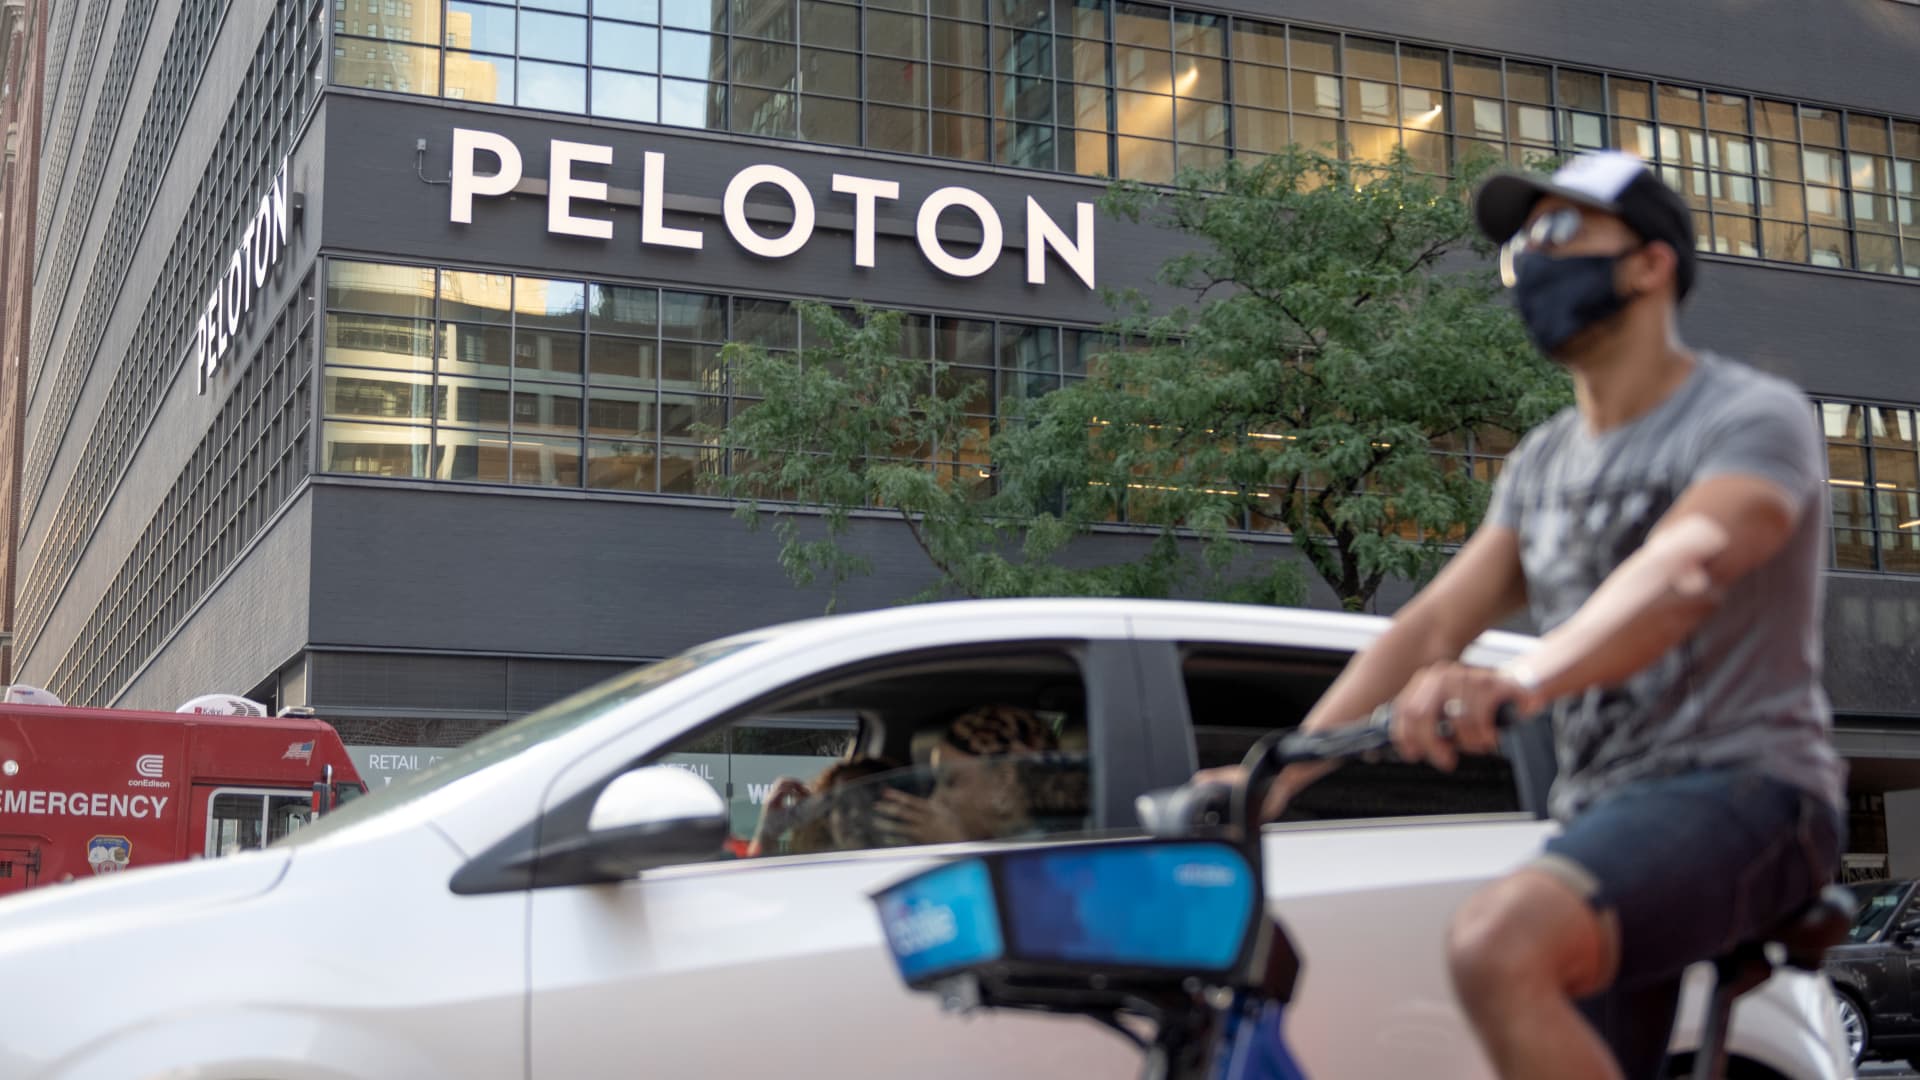 A Peloton office sign is seen near a person riding a bicycle as the city moves into Phase 3 of re-opening following restrictions imposed to curb the coronavirus pandemic on July 16, 2020 in New York City.